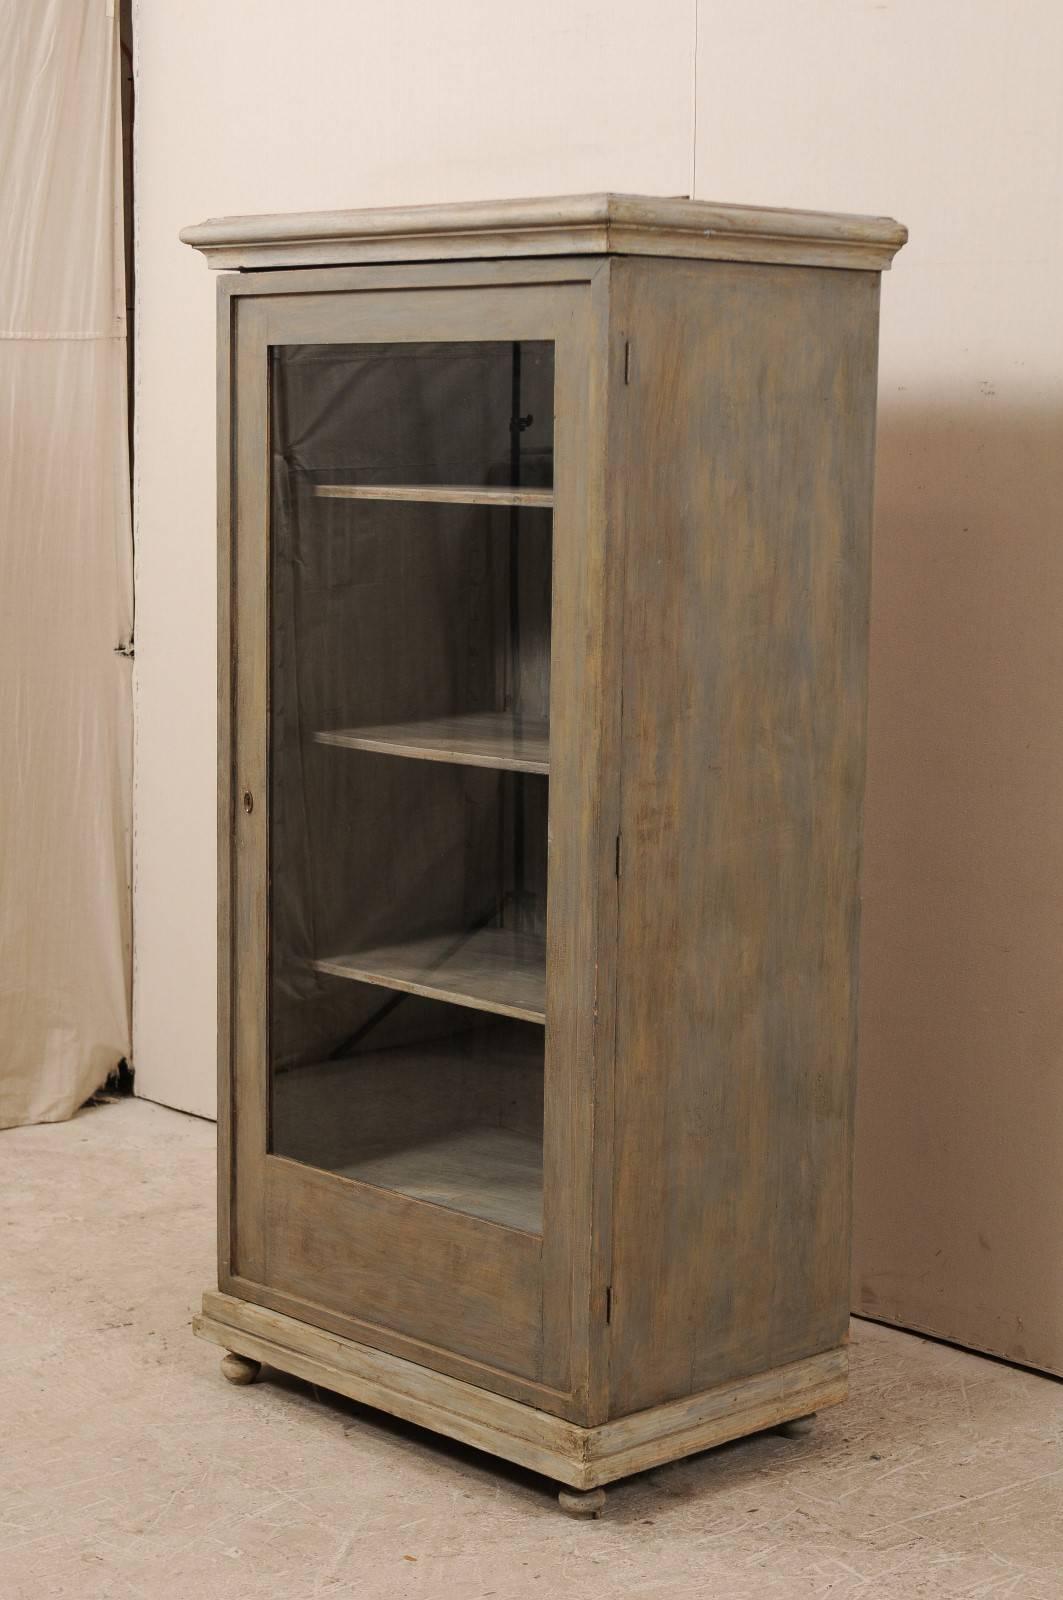 20th Century European Painted Wood Vitrine or Cabinet with Glass Front and Adjustable Shelves